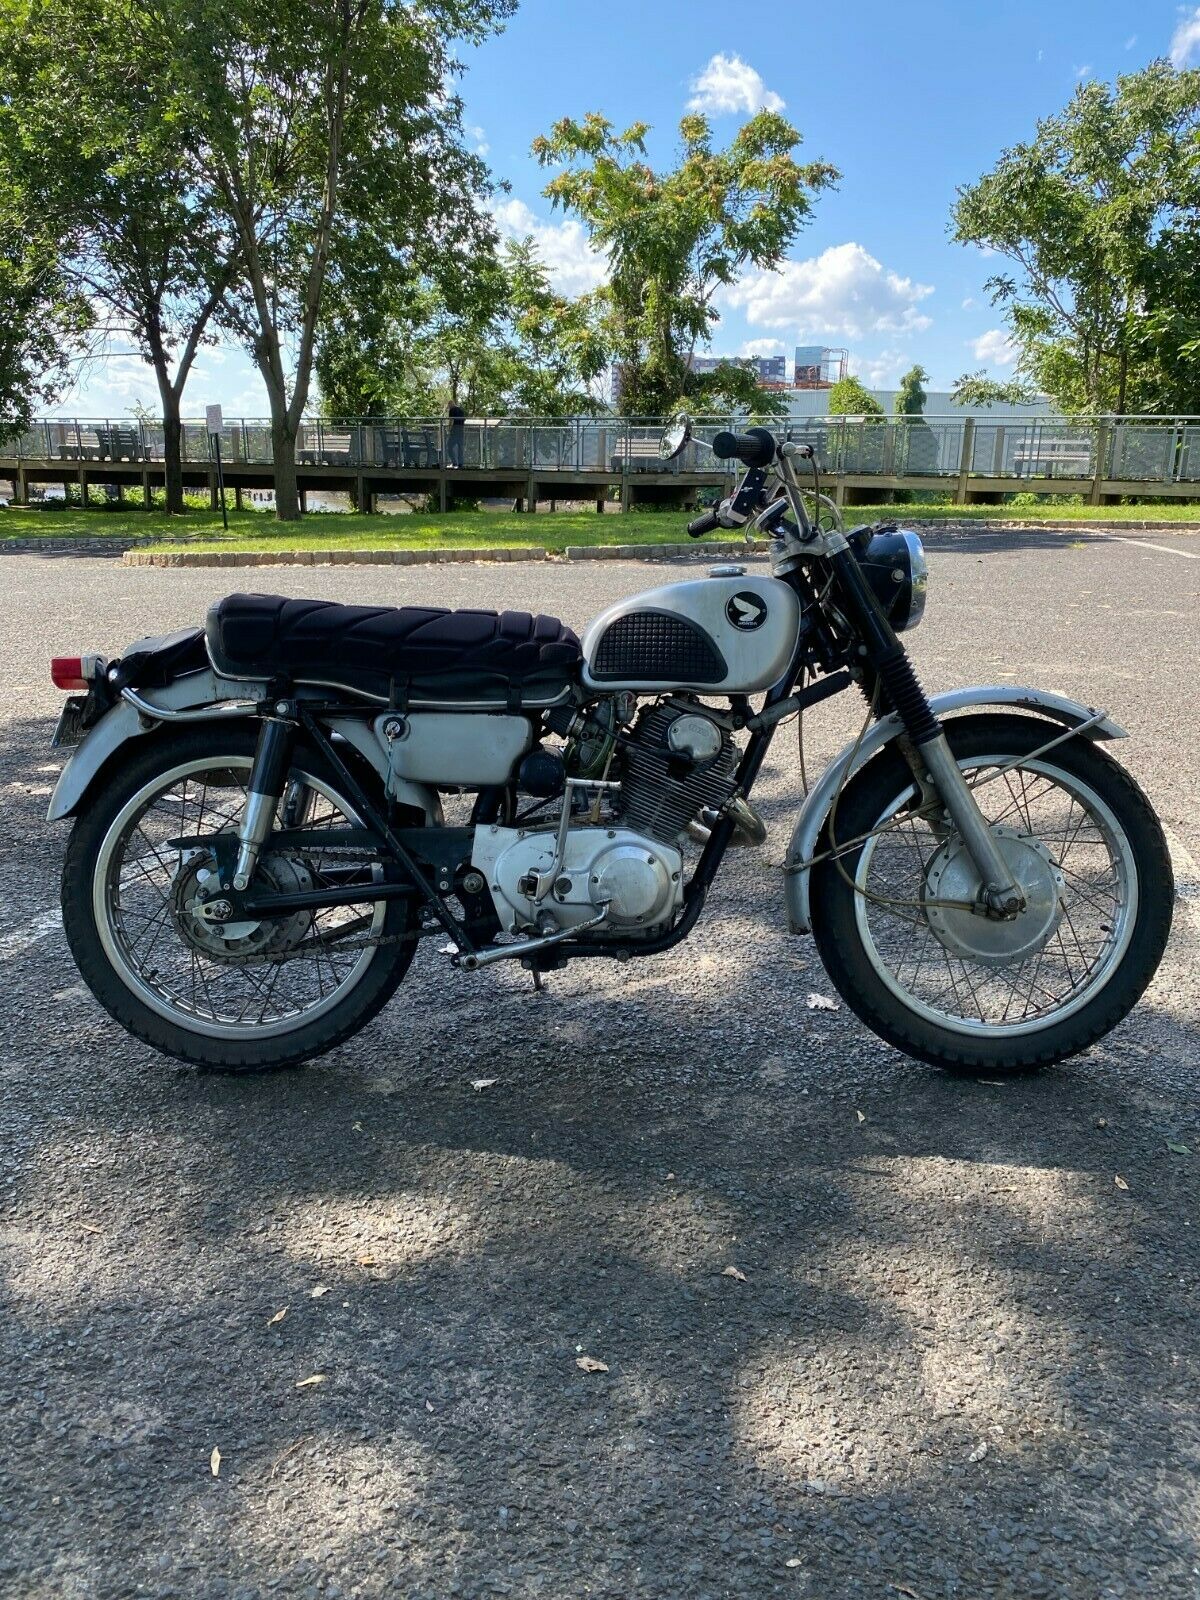 1964 Honda Cl  Cl77 Scambler 305! Dual-carb, Inline-twin!  Runs Perfectly And Ready For Fun!